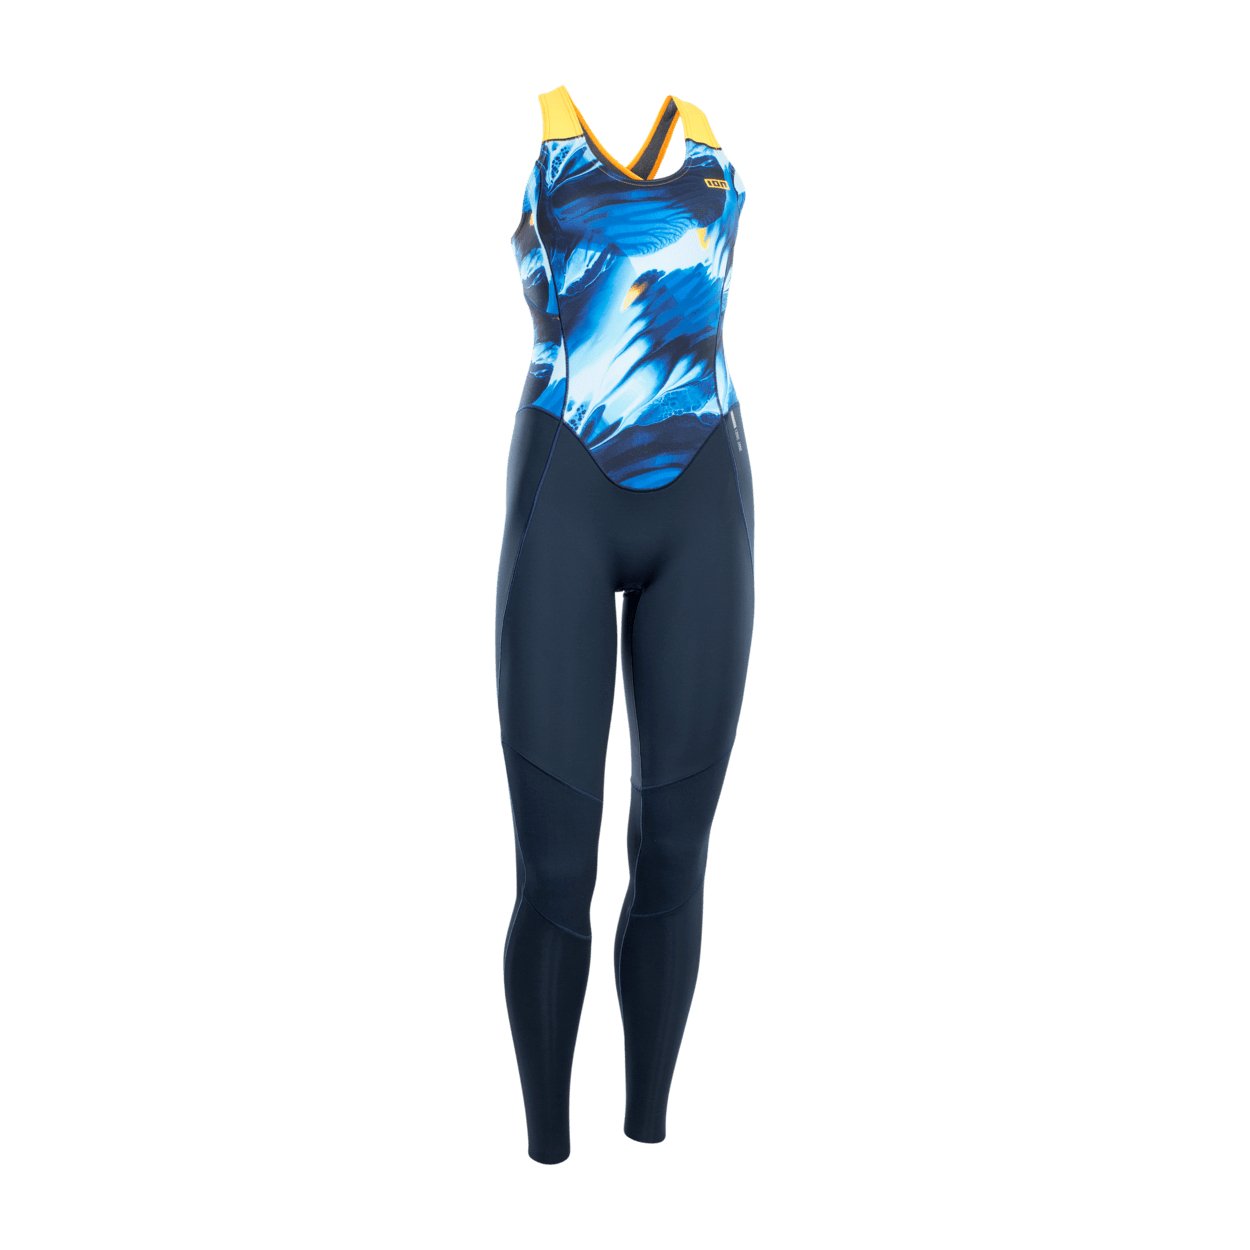 ION Amaze Long Jane 1.5 NZ DL 2021 - Worthing Watersports - 9008415954940 - Wetsuits - ION Water